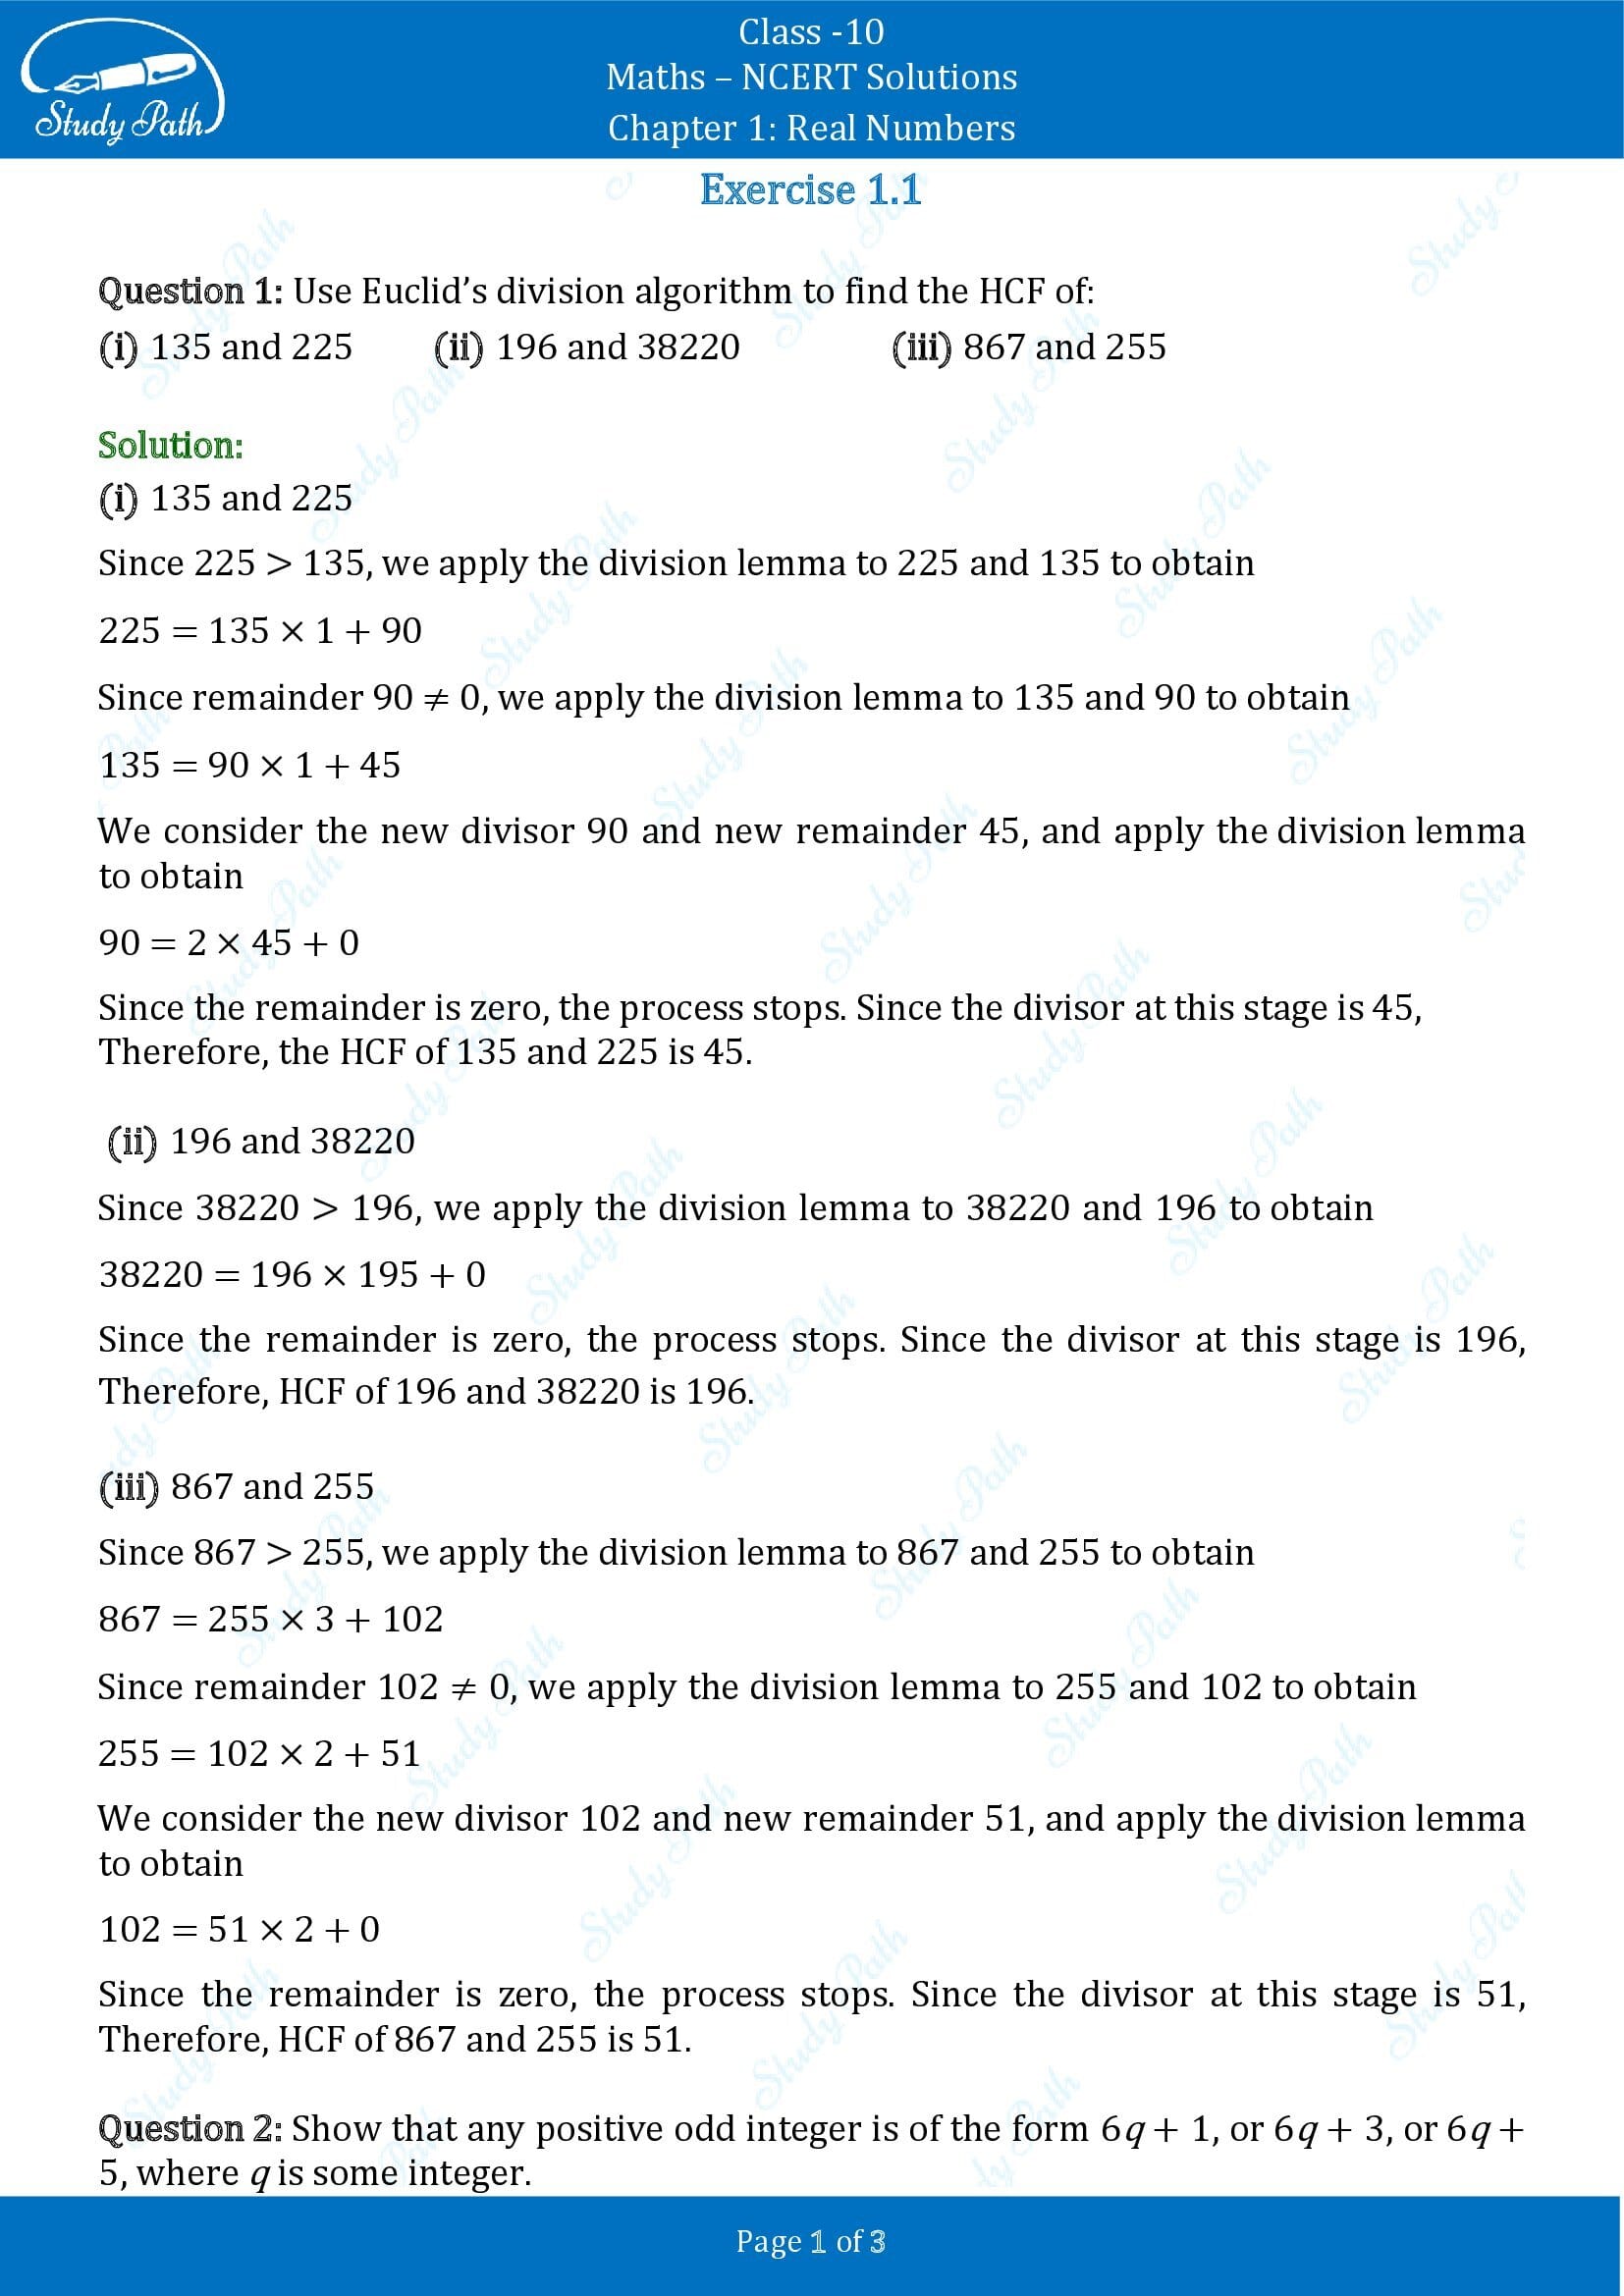 NCERT Solutions for Class 10 Maths Chapter 1 Real Numbers Exercise 1.1 00001